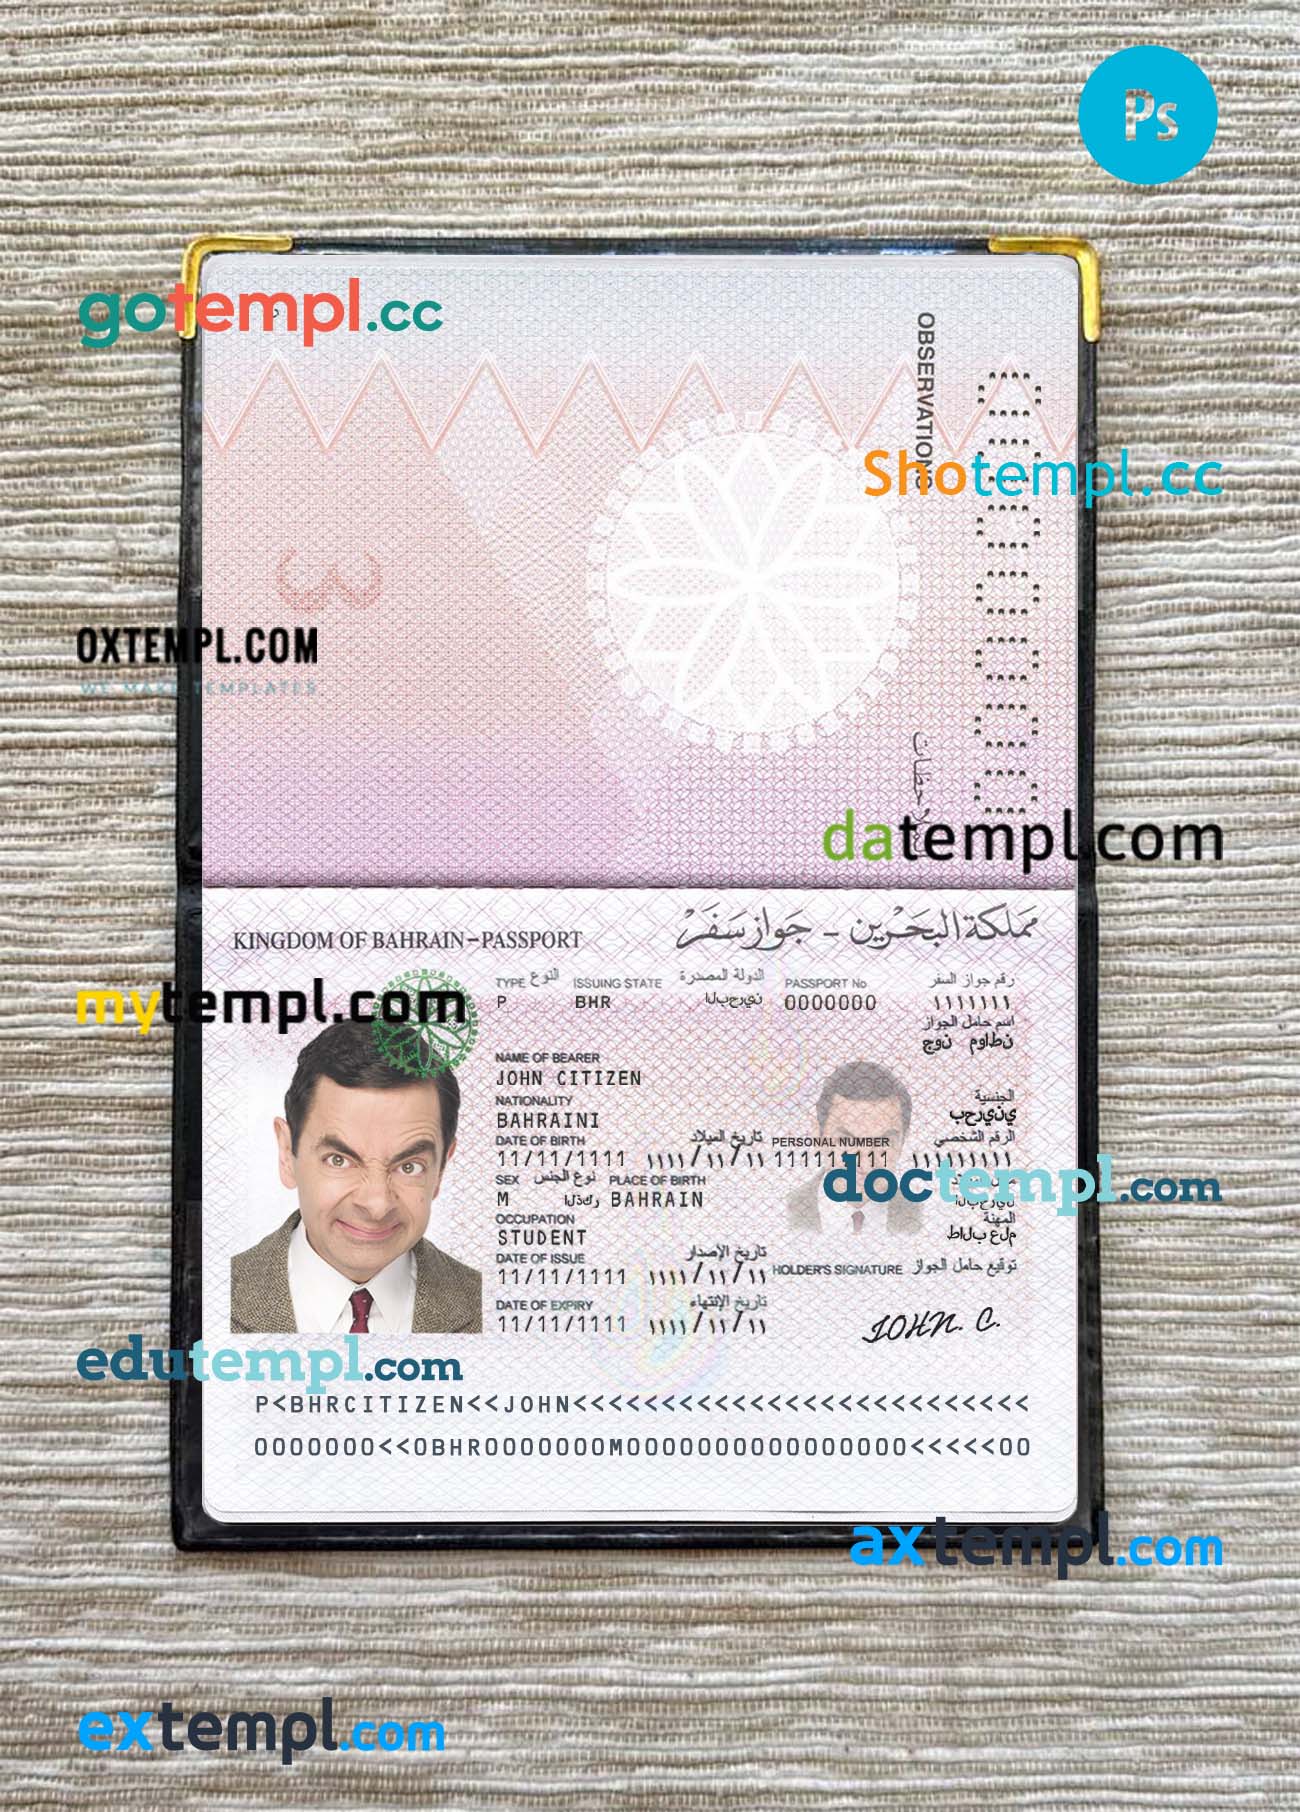 Japan driving license PSD files, scan look and photographed image, 2 in 1